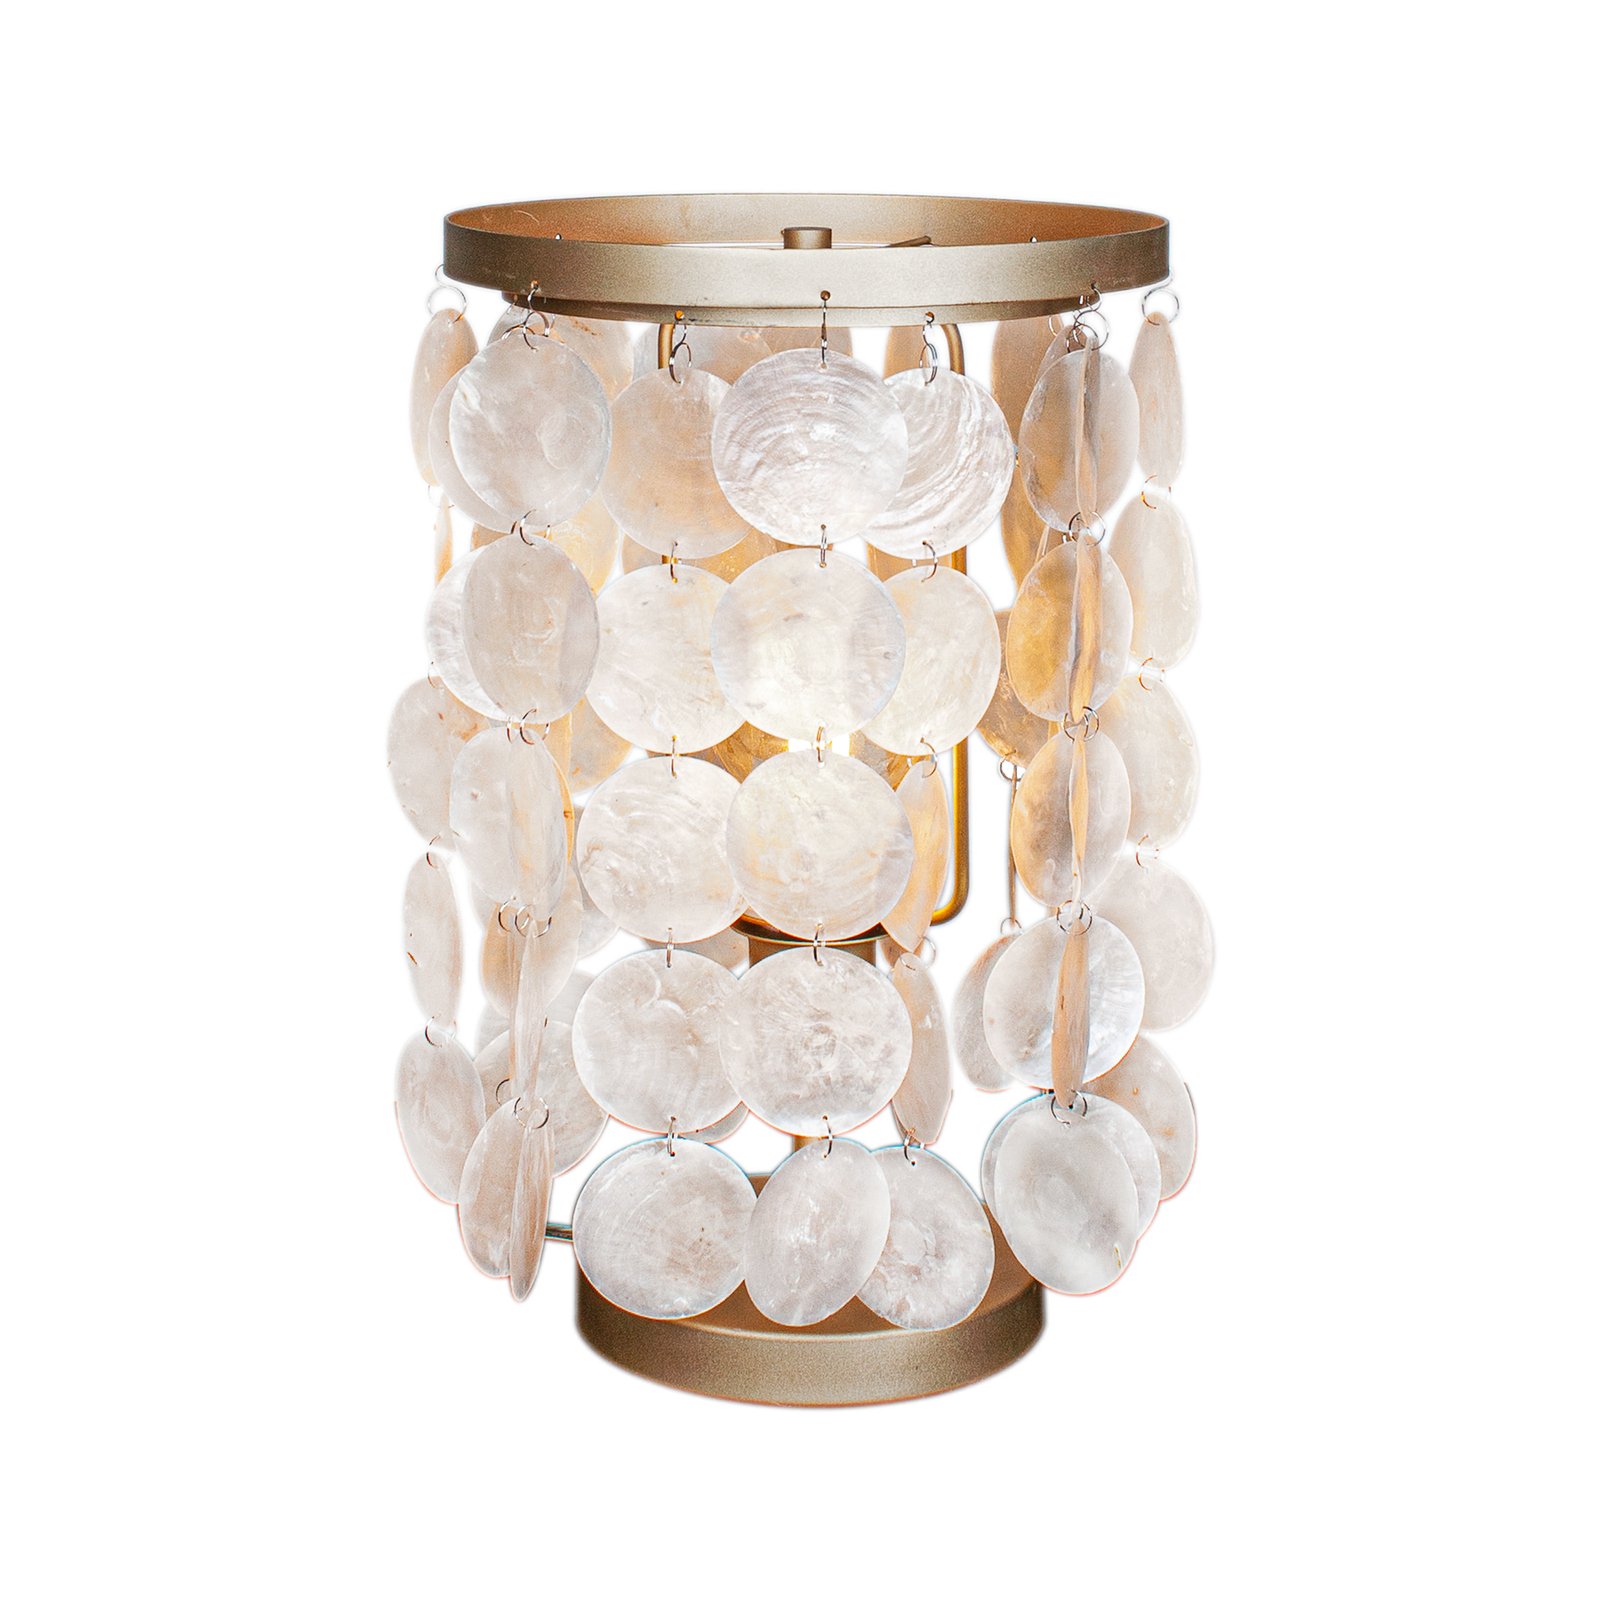 By Rydéns Diana table lamp with shells